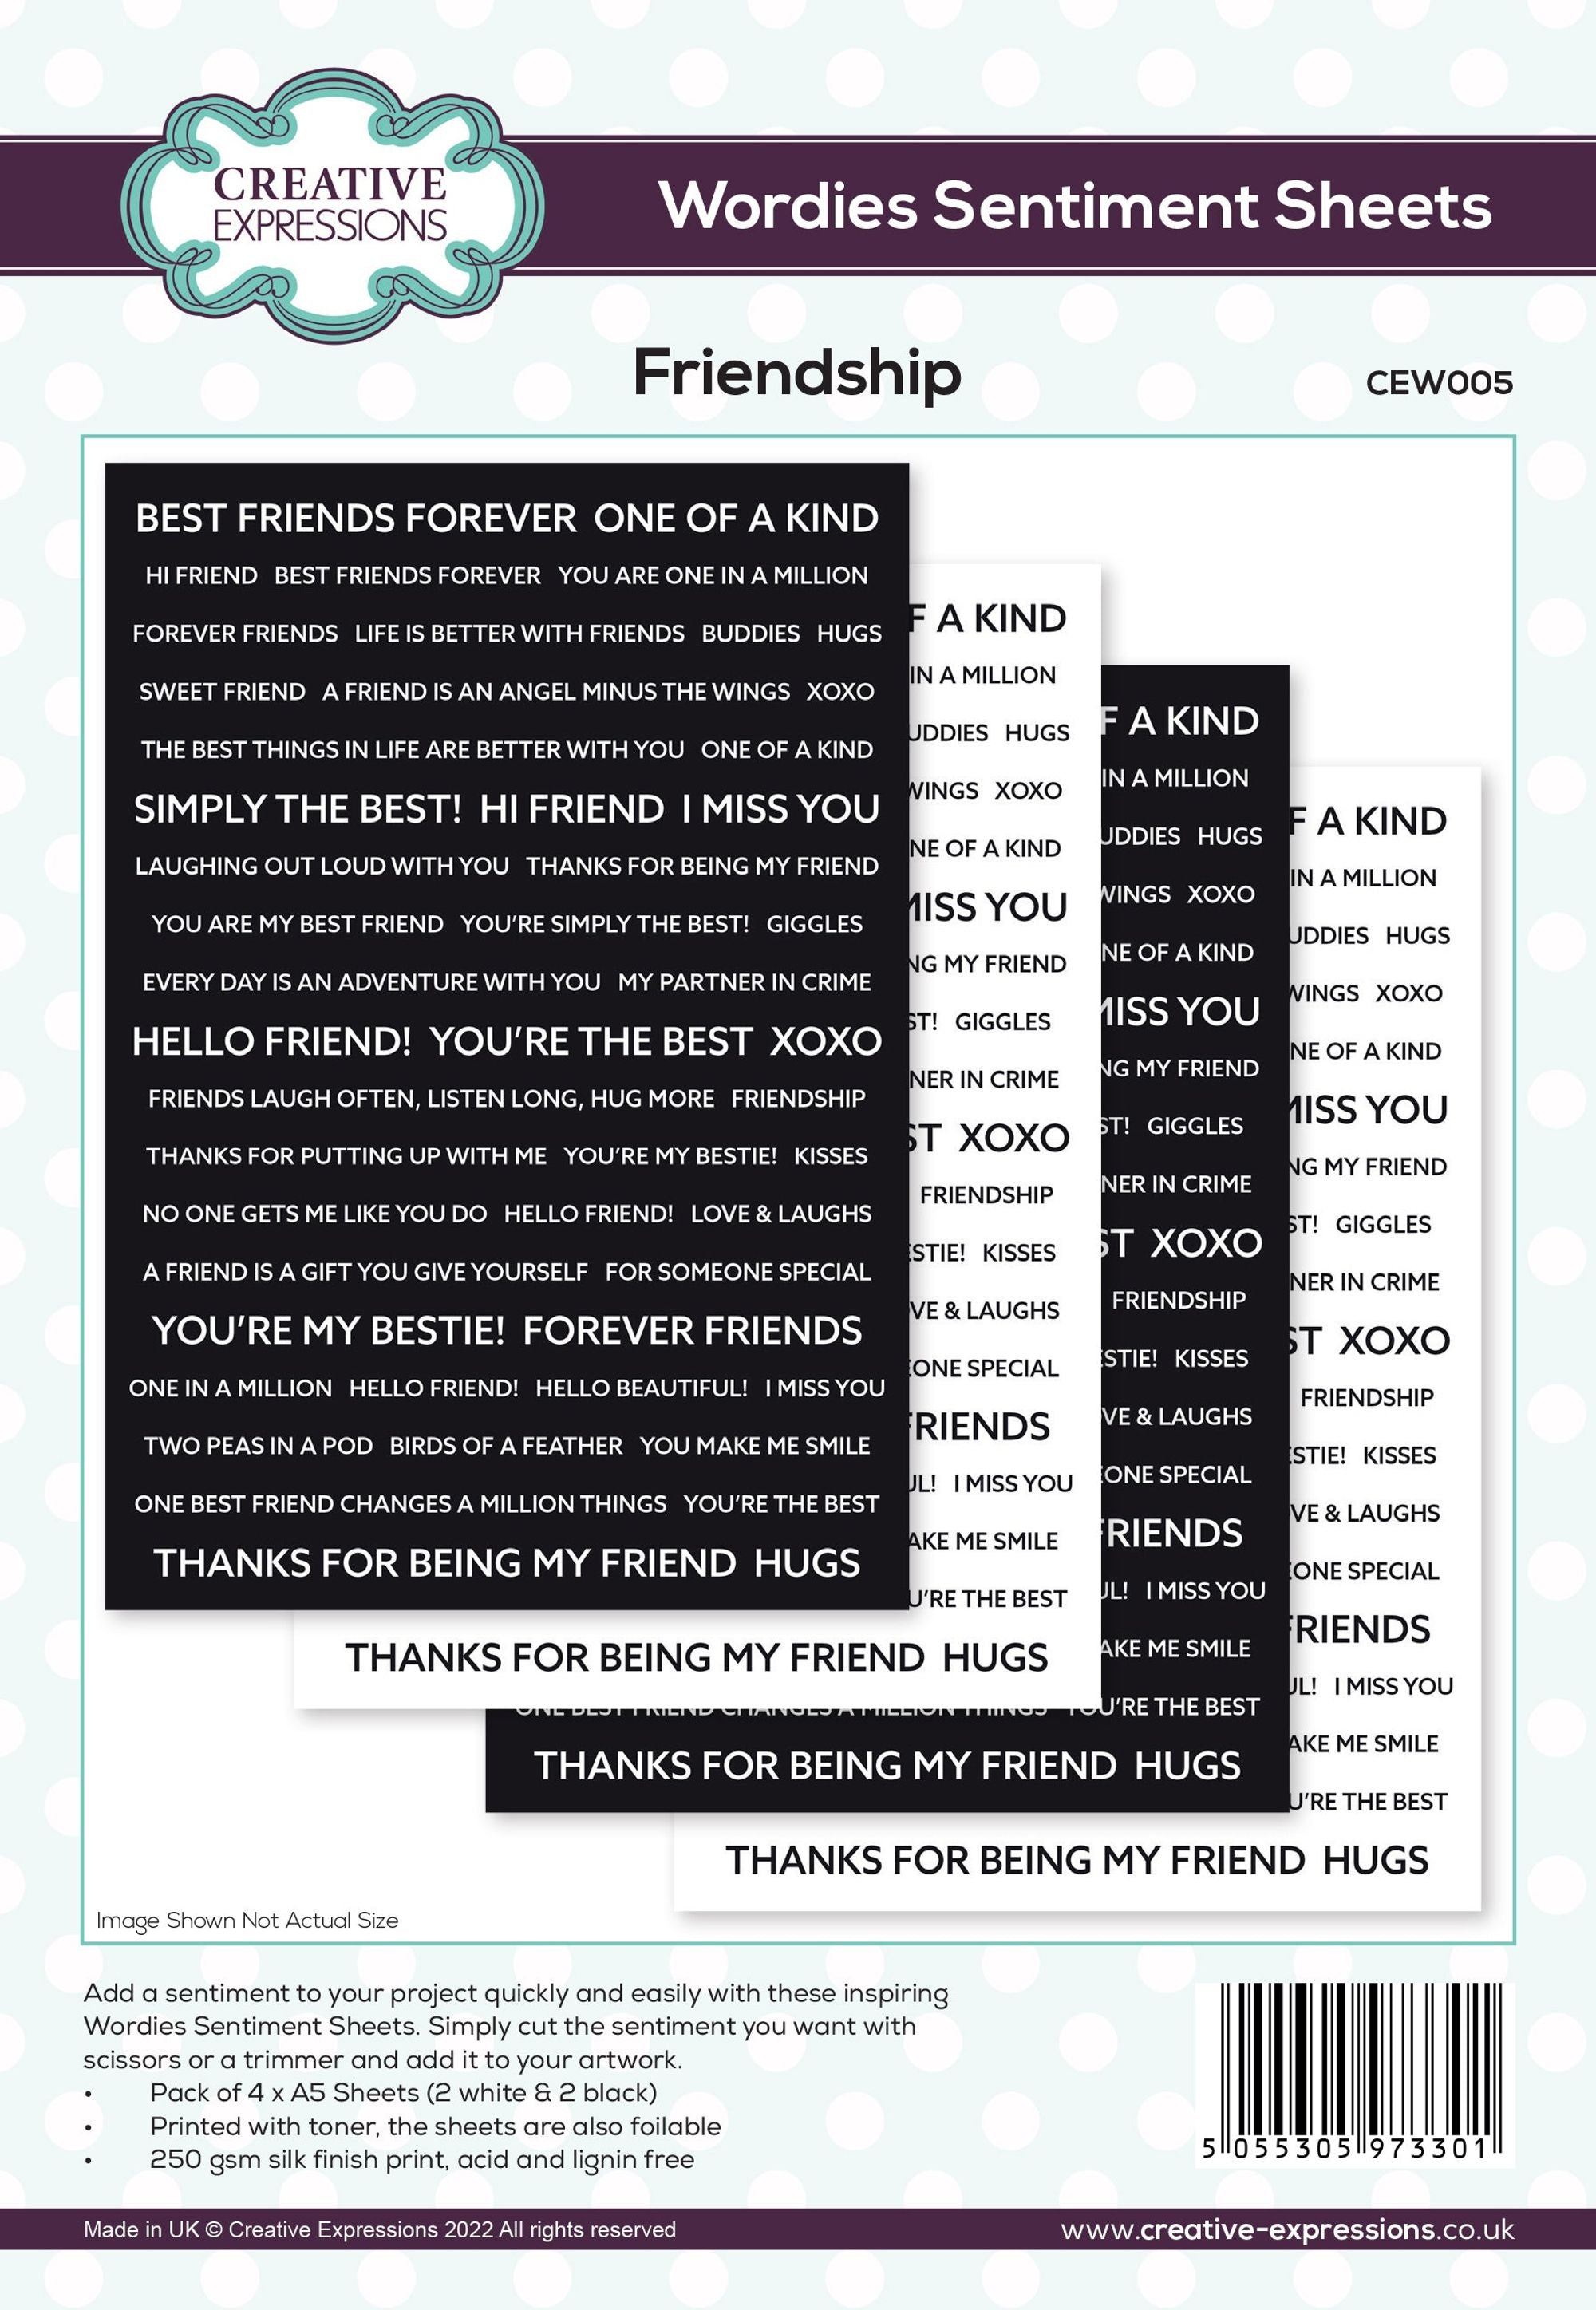 Creative Expressions Wordies Friendship Sentiment Sheets Pk 4 A5